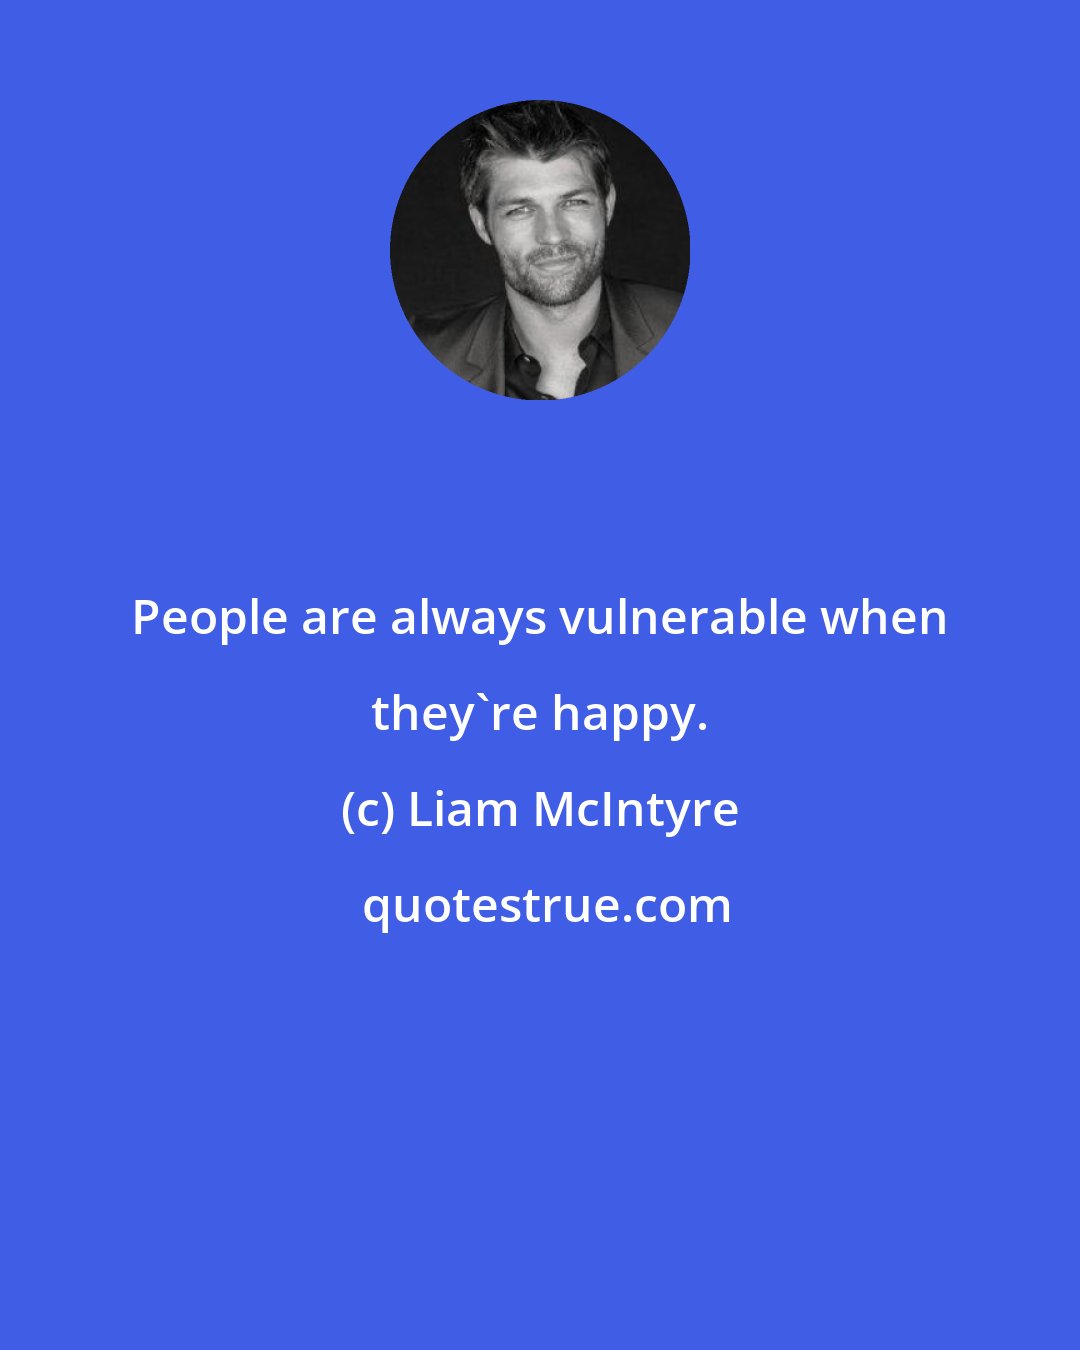 Liam McIntyre: People are always vulnerable when they're happy.